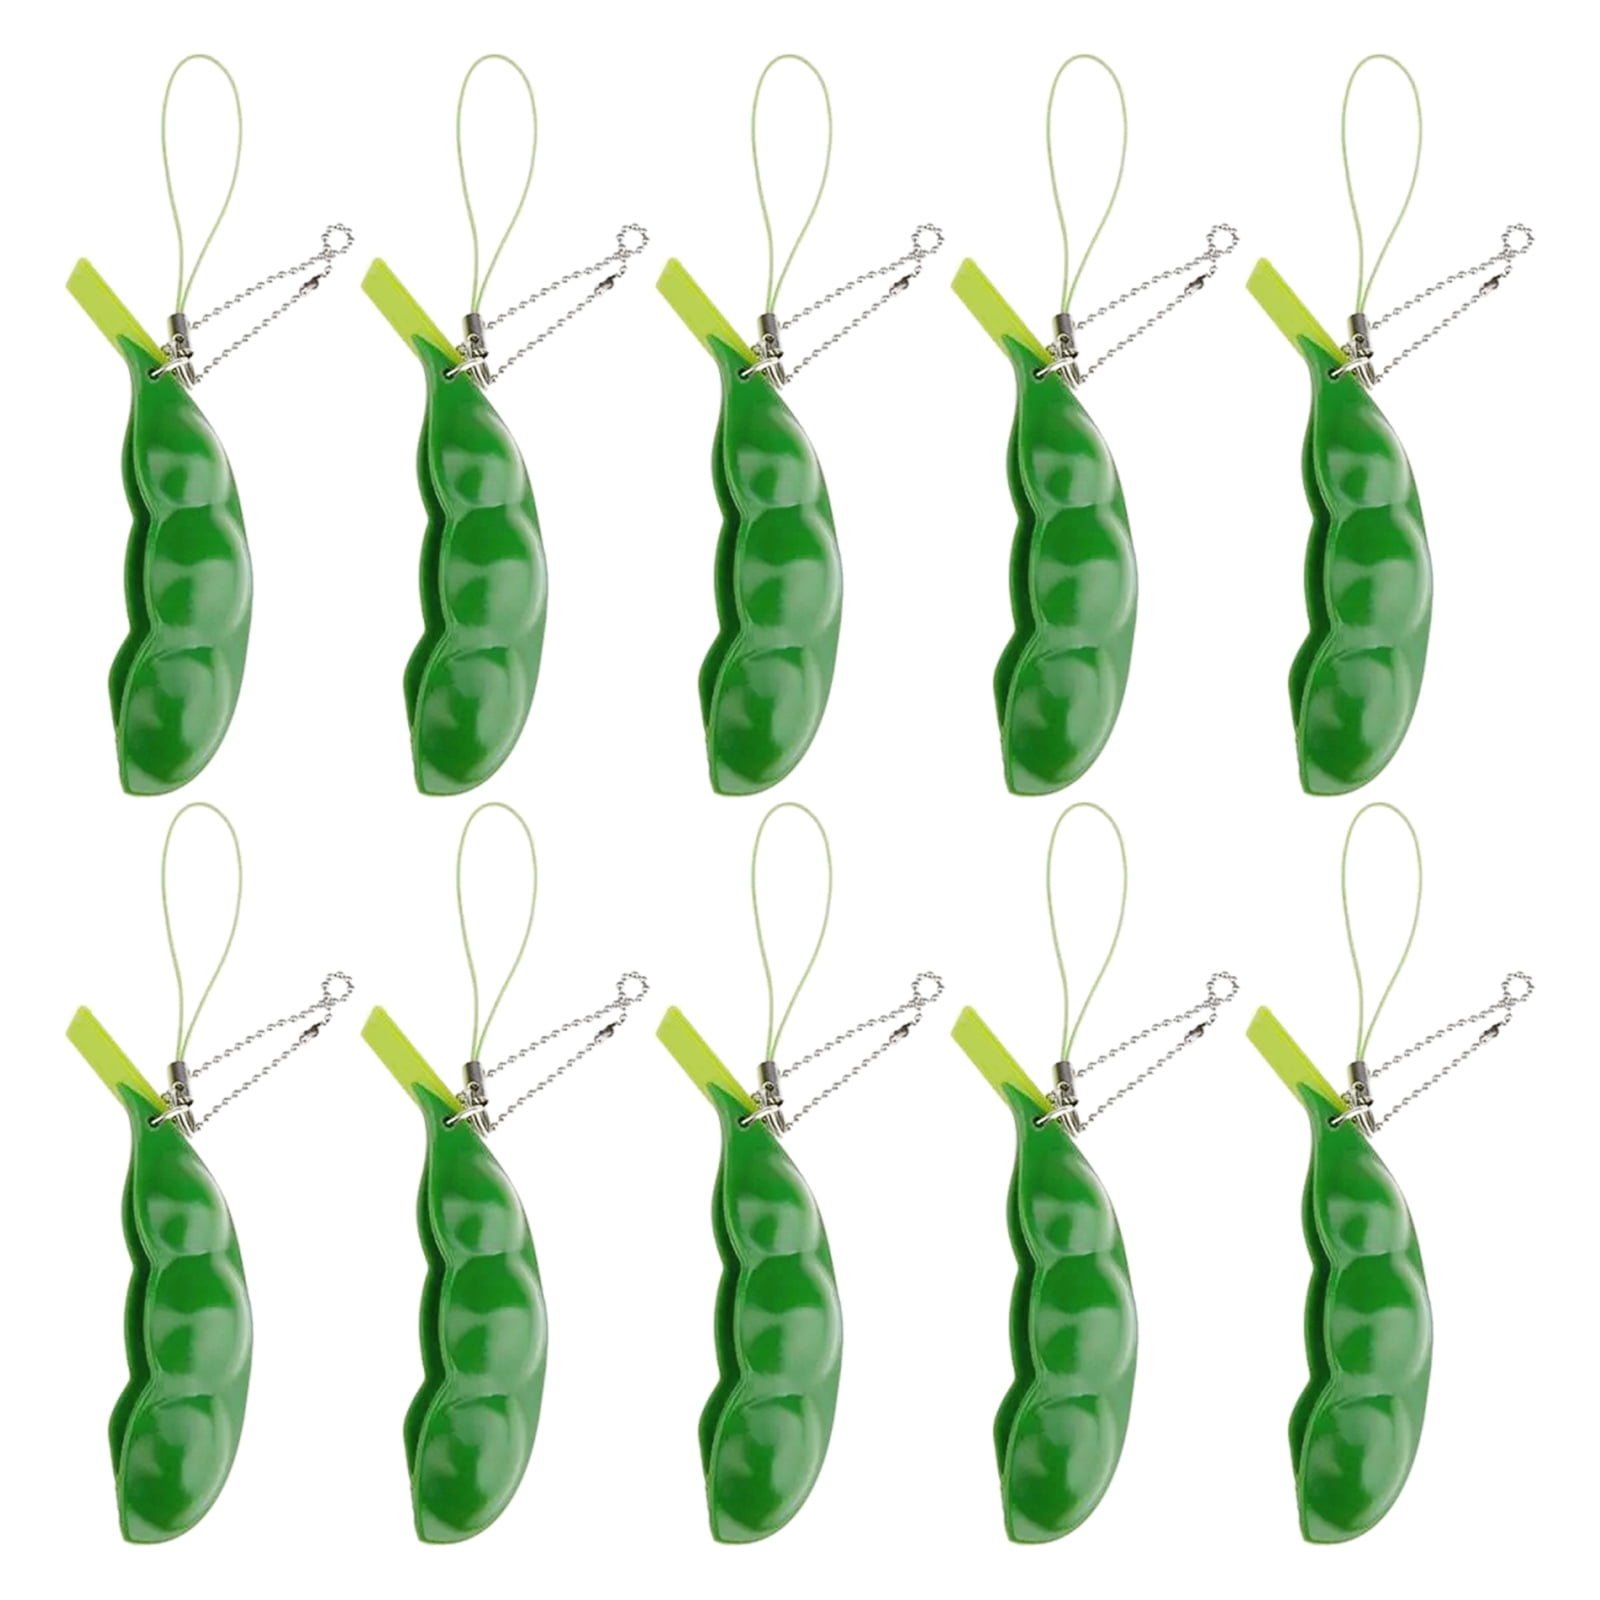 Details about   Pea Popper Stress Relief Anti-Anxiety Toy Autism ADHD Soy Bean Squeeze Bean 1x 